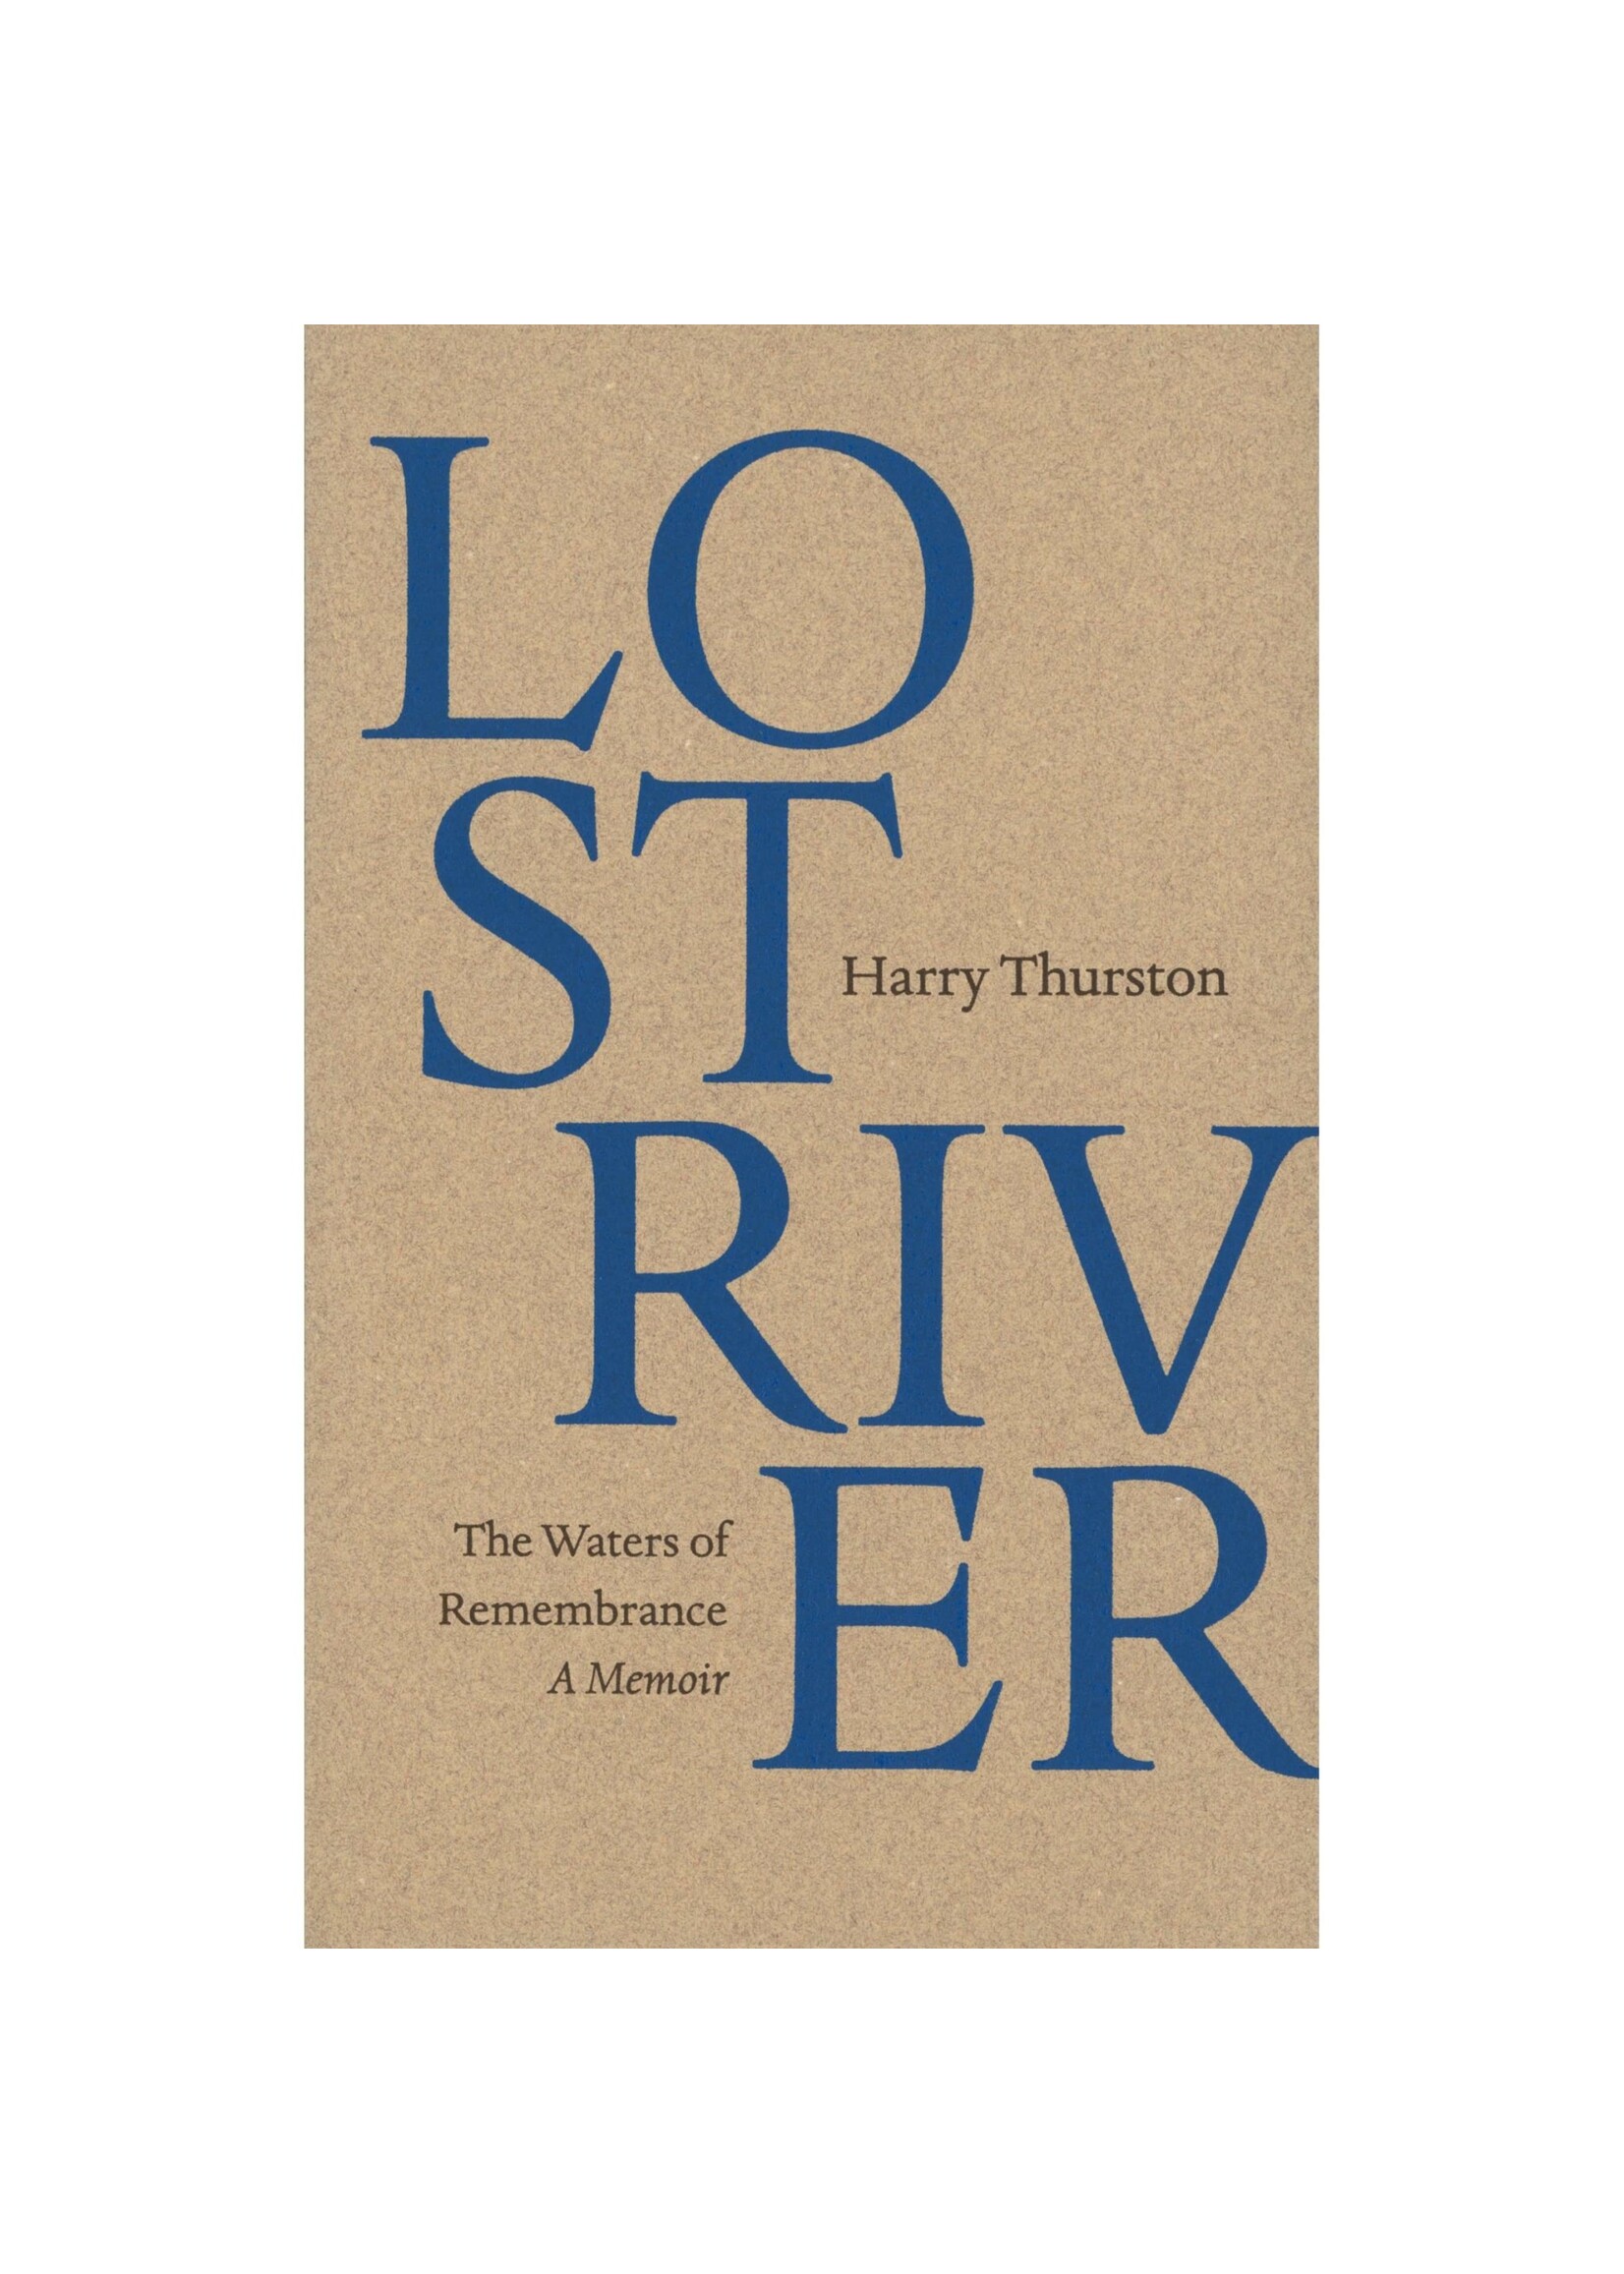 Lost River: The Waters of Remembrance, A Memoir by Harry Thurston